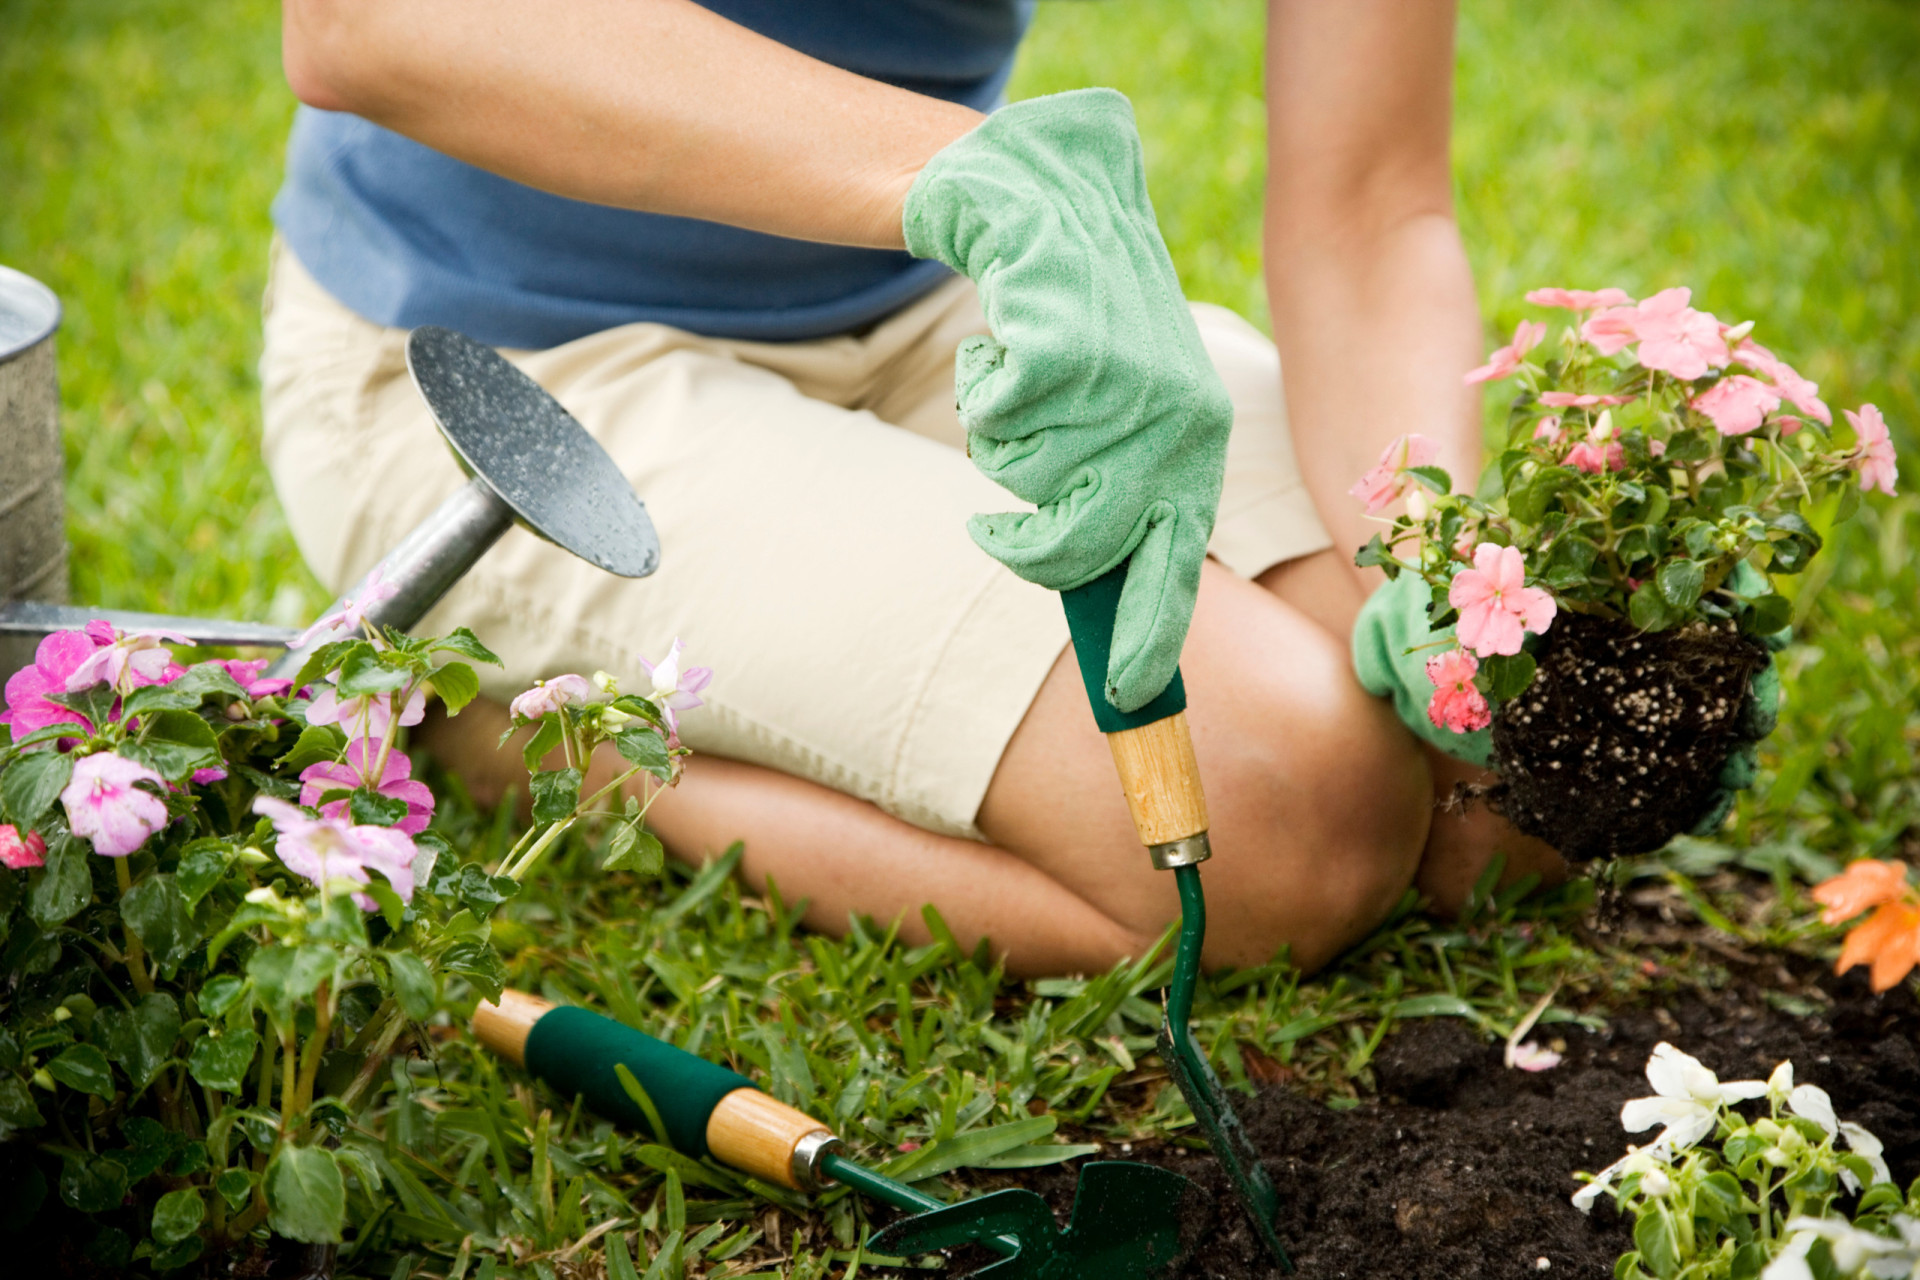 <p>Has gardening always been a passion for mom? Is she always in the yard, planting flowers and herbs? Consider sending her something green to plant and enjoy for years to come that also reminds her of you.</p><p>You may also like:<a href="https://www.starsinsider.com/n/344330?utm_source=msn.com&utm_medium=display&utm_campaign=referral_description&utm_content=708861en-us"> The loneliest things in the universe</a></p>